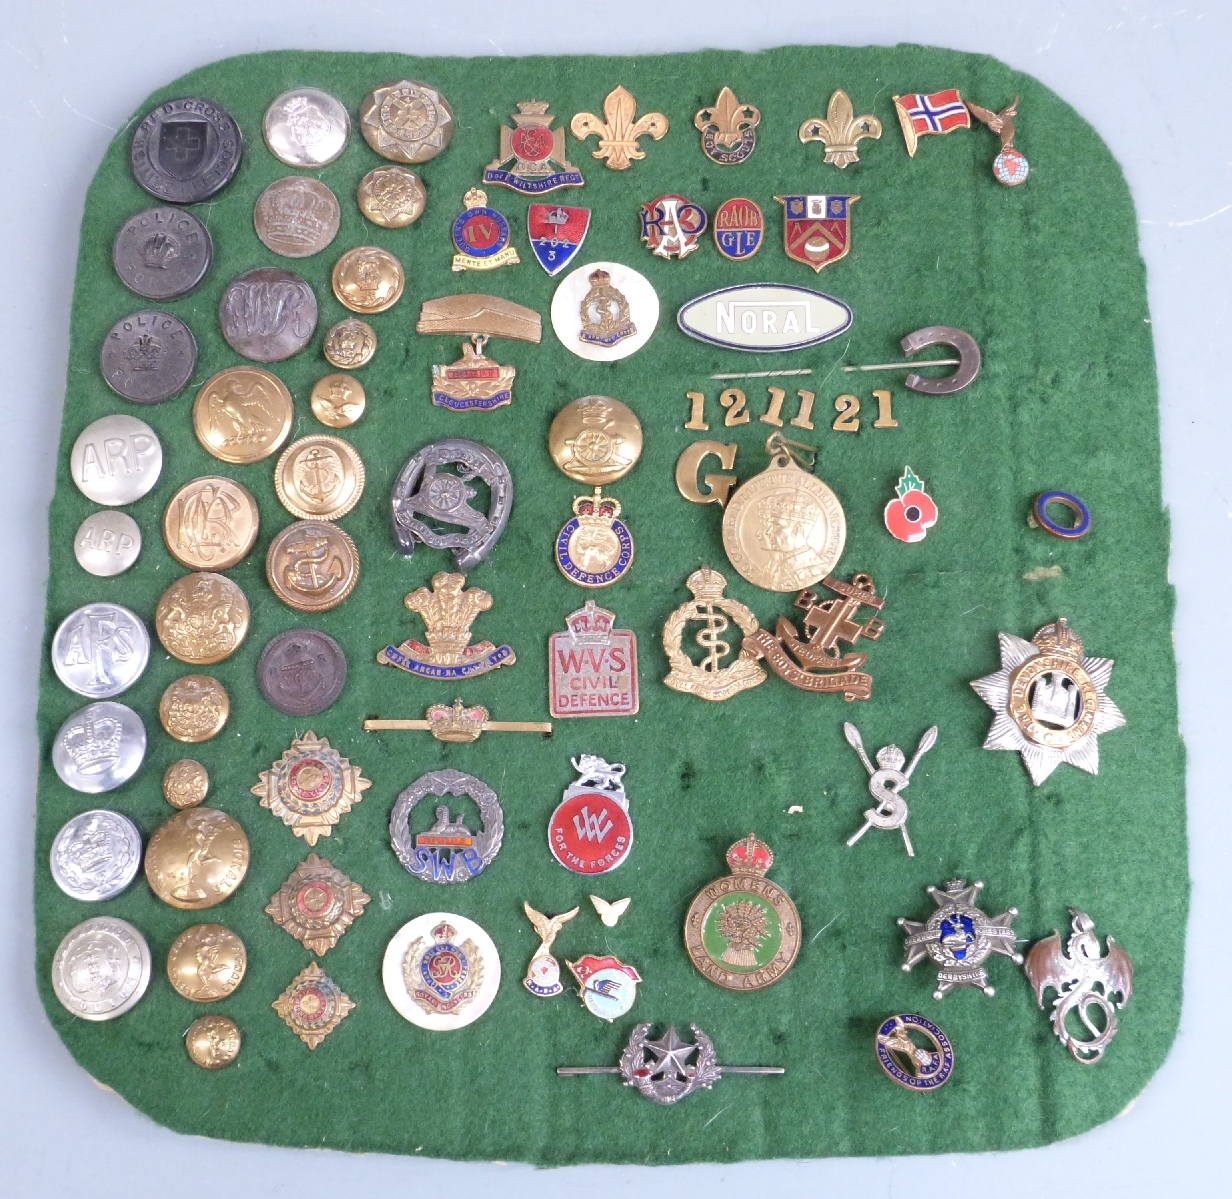 A collection of military buttons, sweetheart brooches and enamel and metal lapel badges including